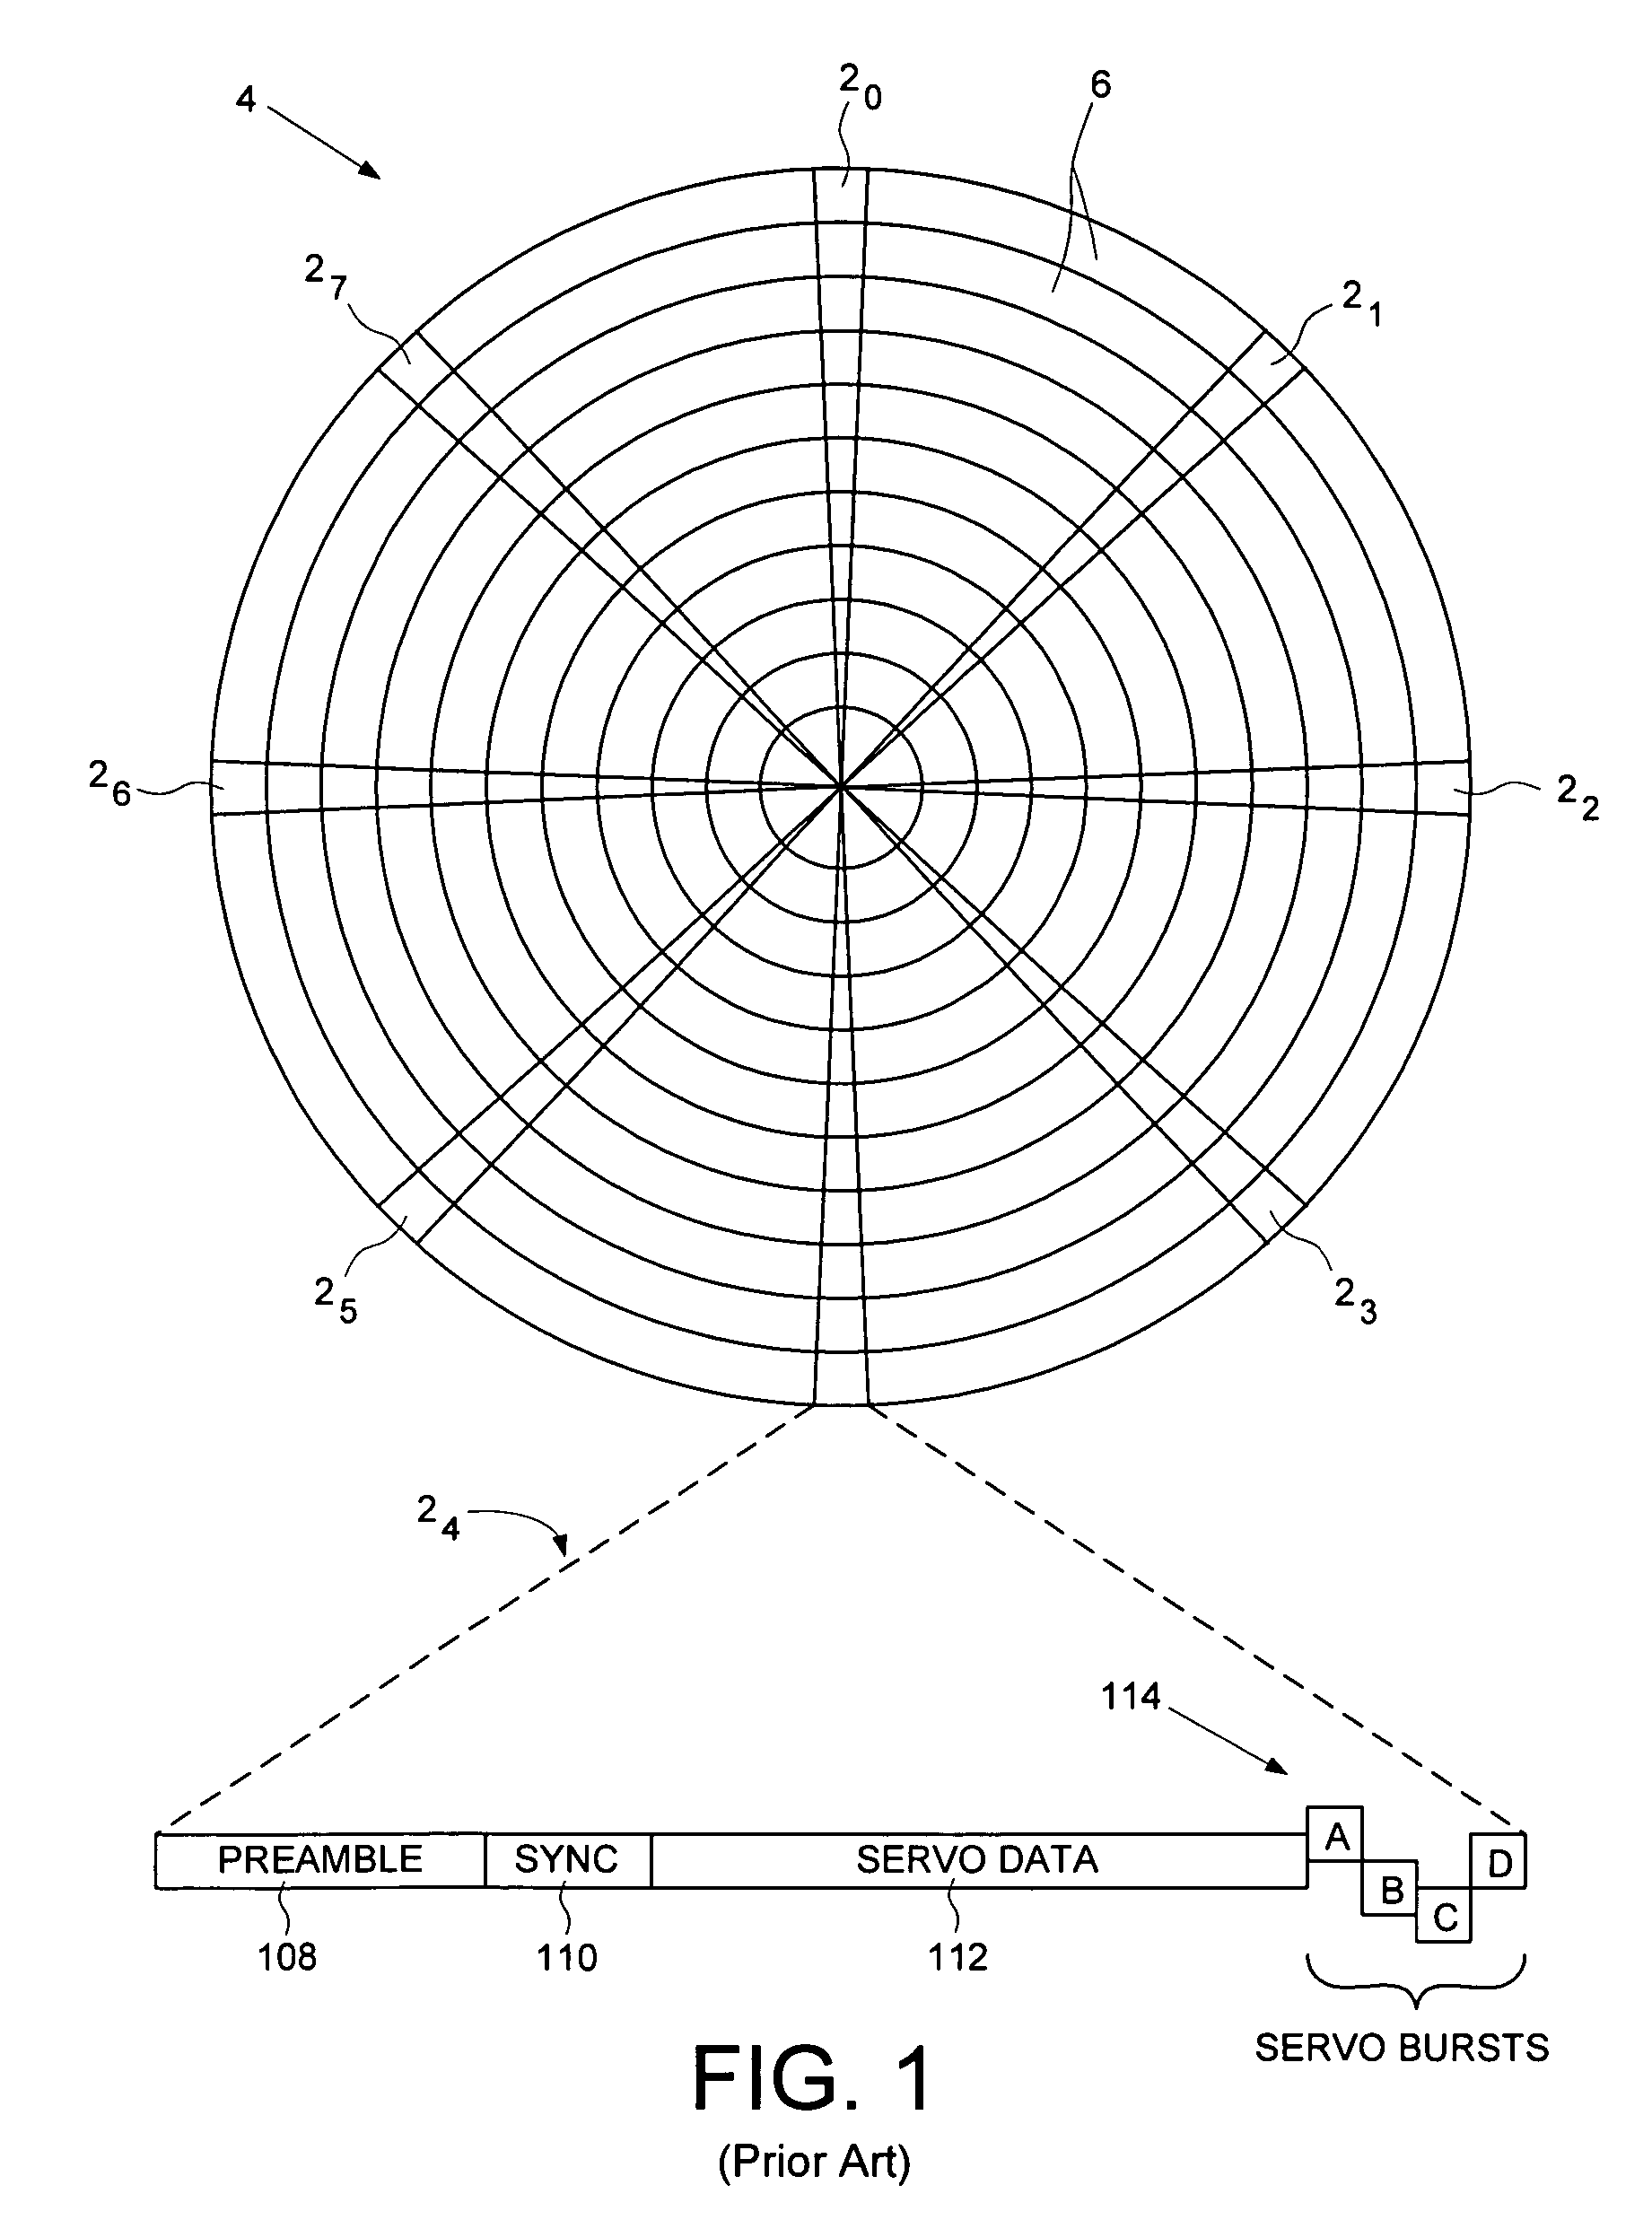 Method for reducing disk thermal expansion effects while writing reference spiral servo patterns to a disk of a disk drive